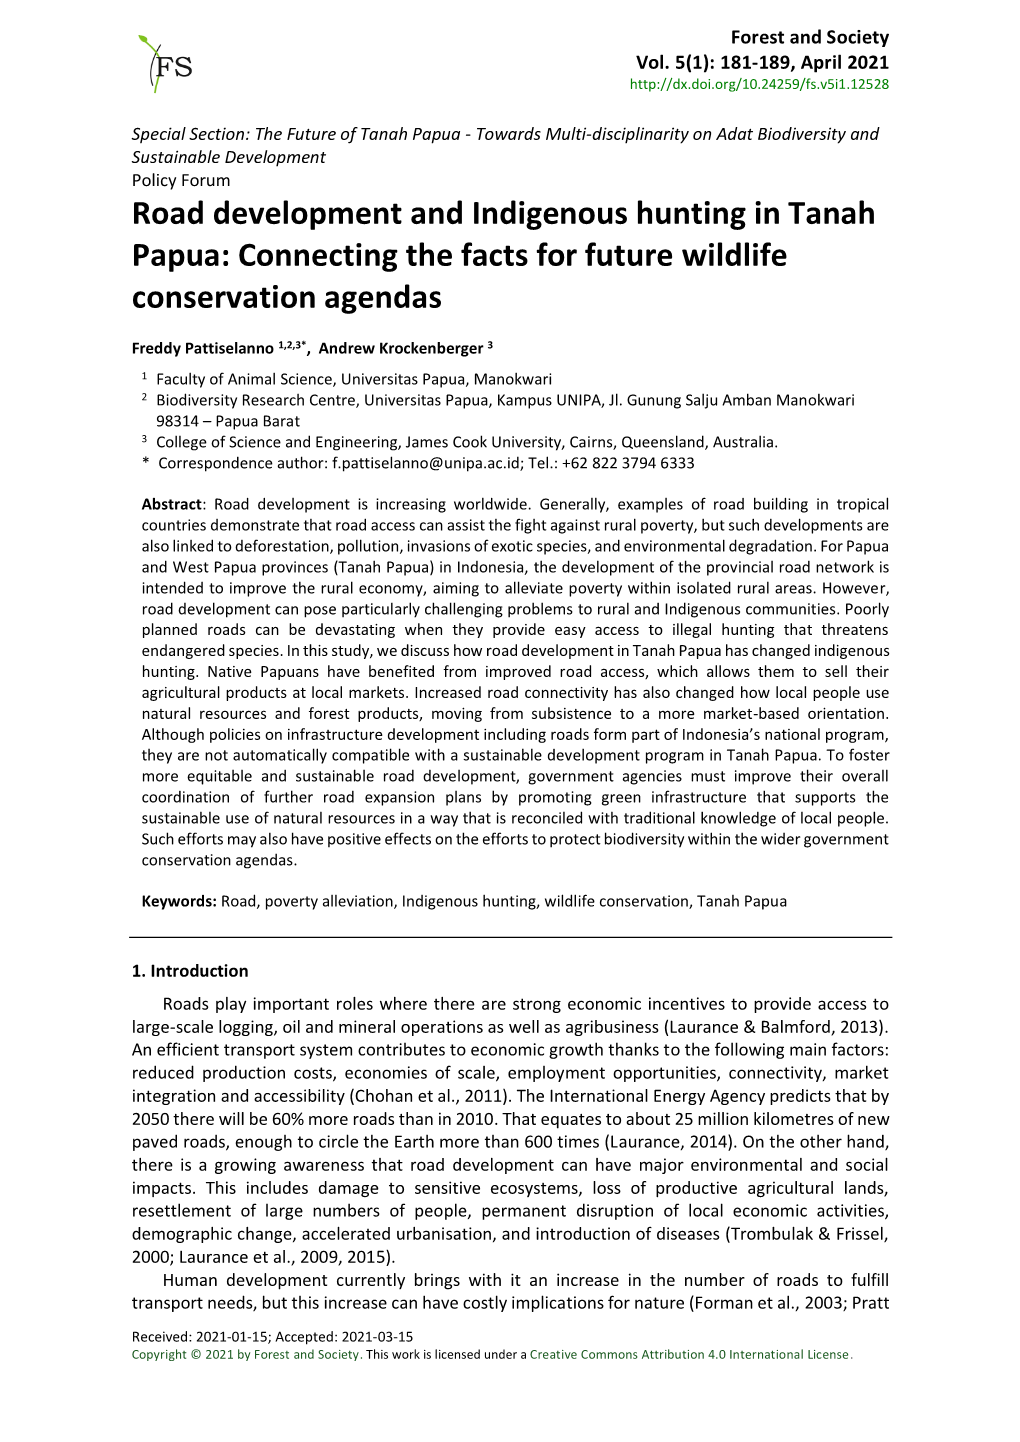 Road Development and Indigenous Hunting in Tanah Papua: Connecting the Facts for Future Wildlife Conservation Agendas